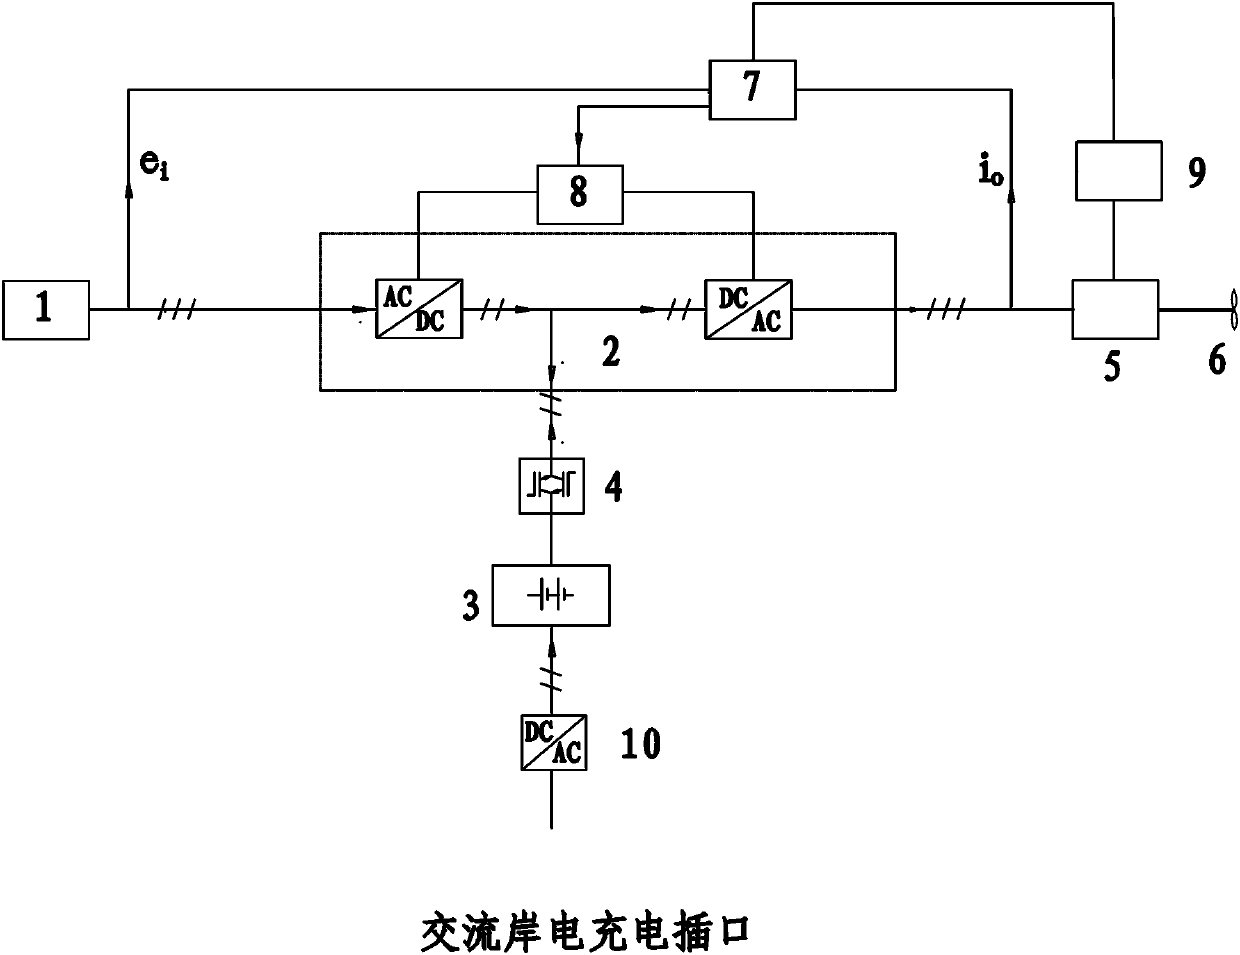 Indirect type matrix control system for electricity-oil hybrid energy conversion electric driving ship